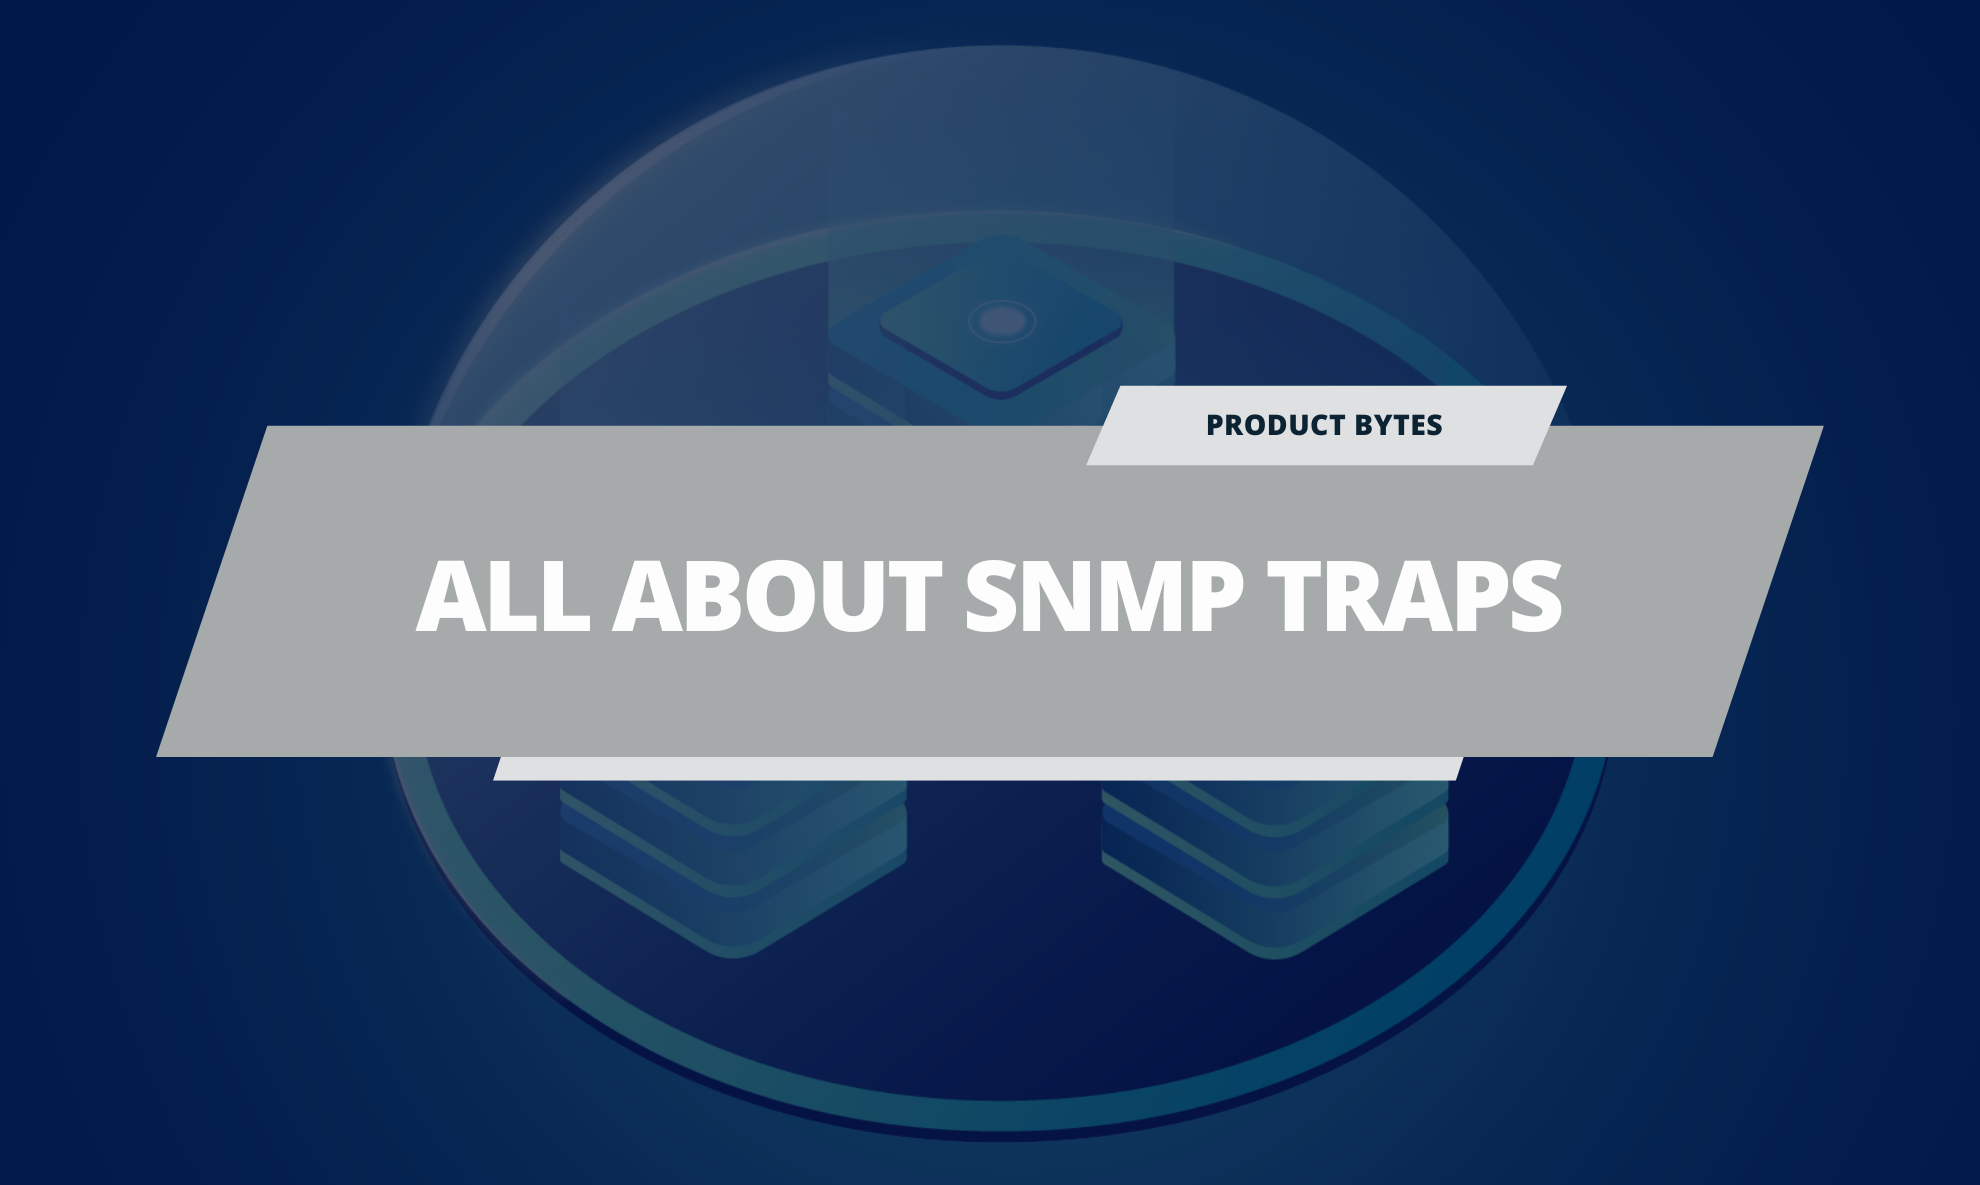 What is an SNMP Trap? What Are the Benefits of SNMP Traps?